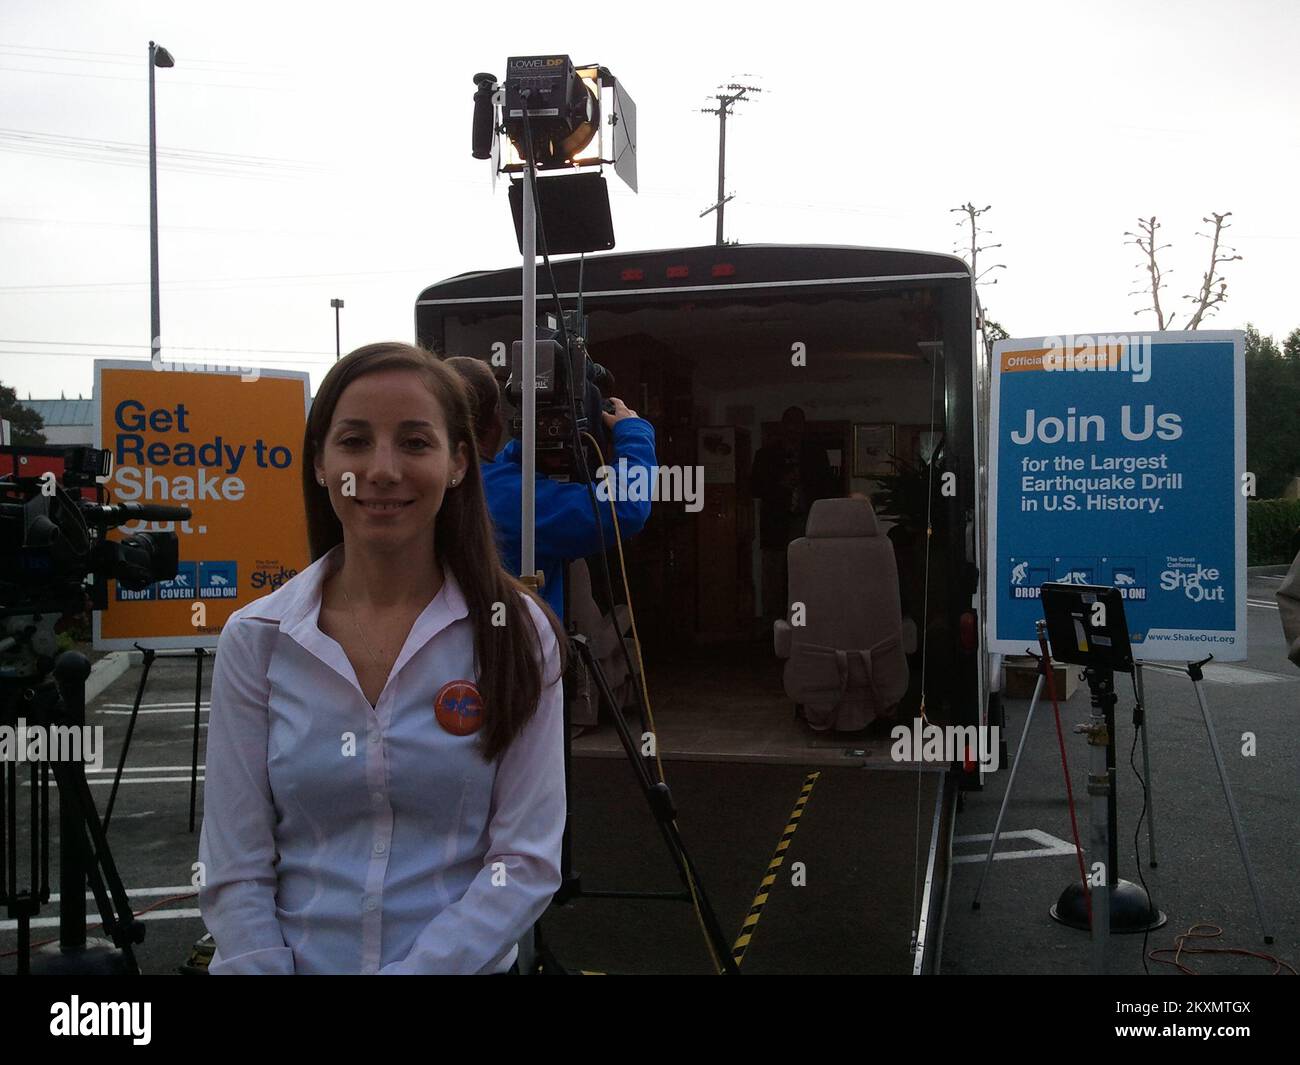 Earthquake - Northridge, Calif. , Oct. 20, 2011   FEMA Region IX Earthquake Specialist, Jennifer Lynette, in front of an earthquake simulator truck at the Great California ShakeOut media event at Target. The ShakeOut drill and press event participants included FEMA, CalEMA, LA City Council Members, USGS, SCEC, ECA, Mexican delegation, Japanese delegation, Target, and the general public... Photographs Relating to Disasters and Emergency Management Programs, Activities, and Officials Stock Photo